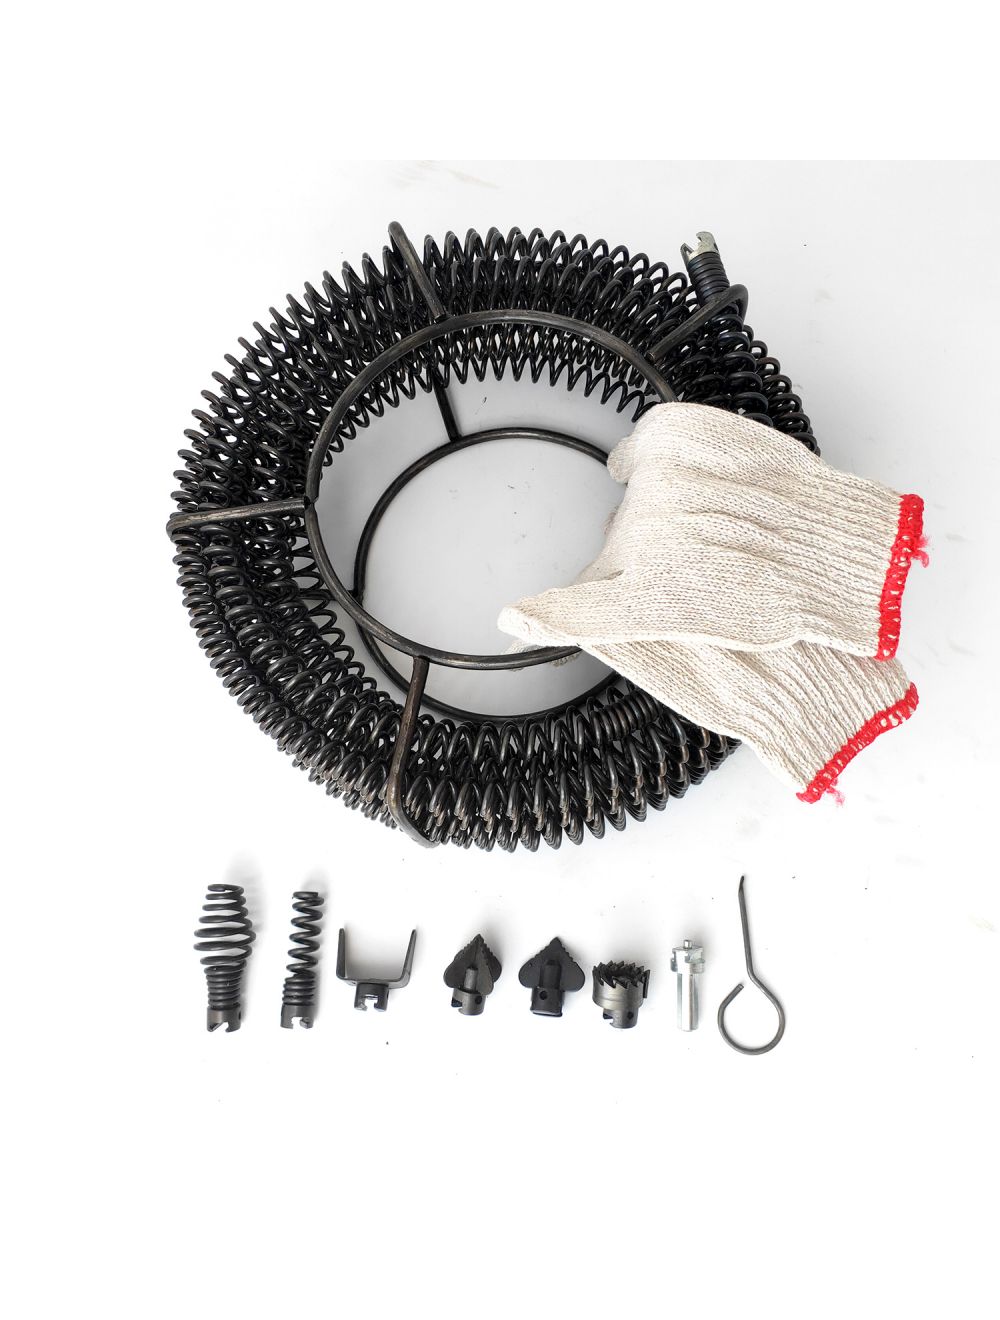 12M 24M 2.5M Spiral Electrical Drill Drain Snake Pipe Pipeline Sewer Cleaner